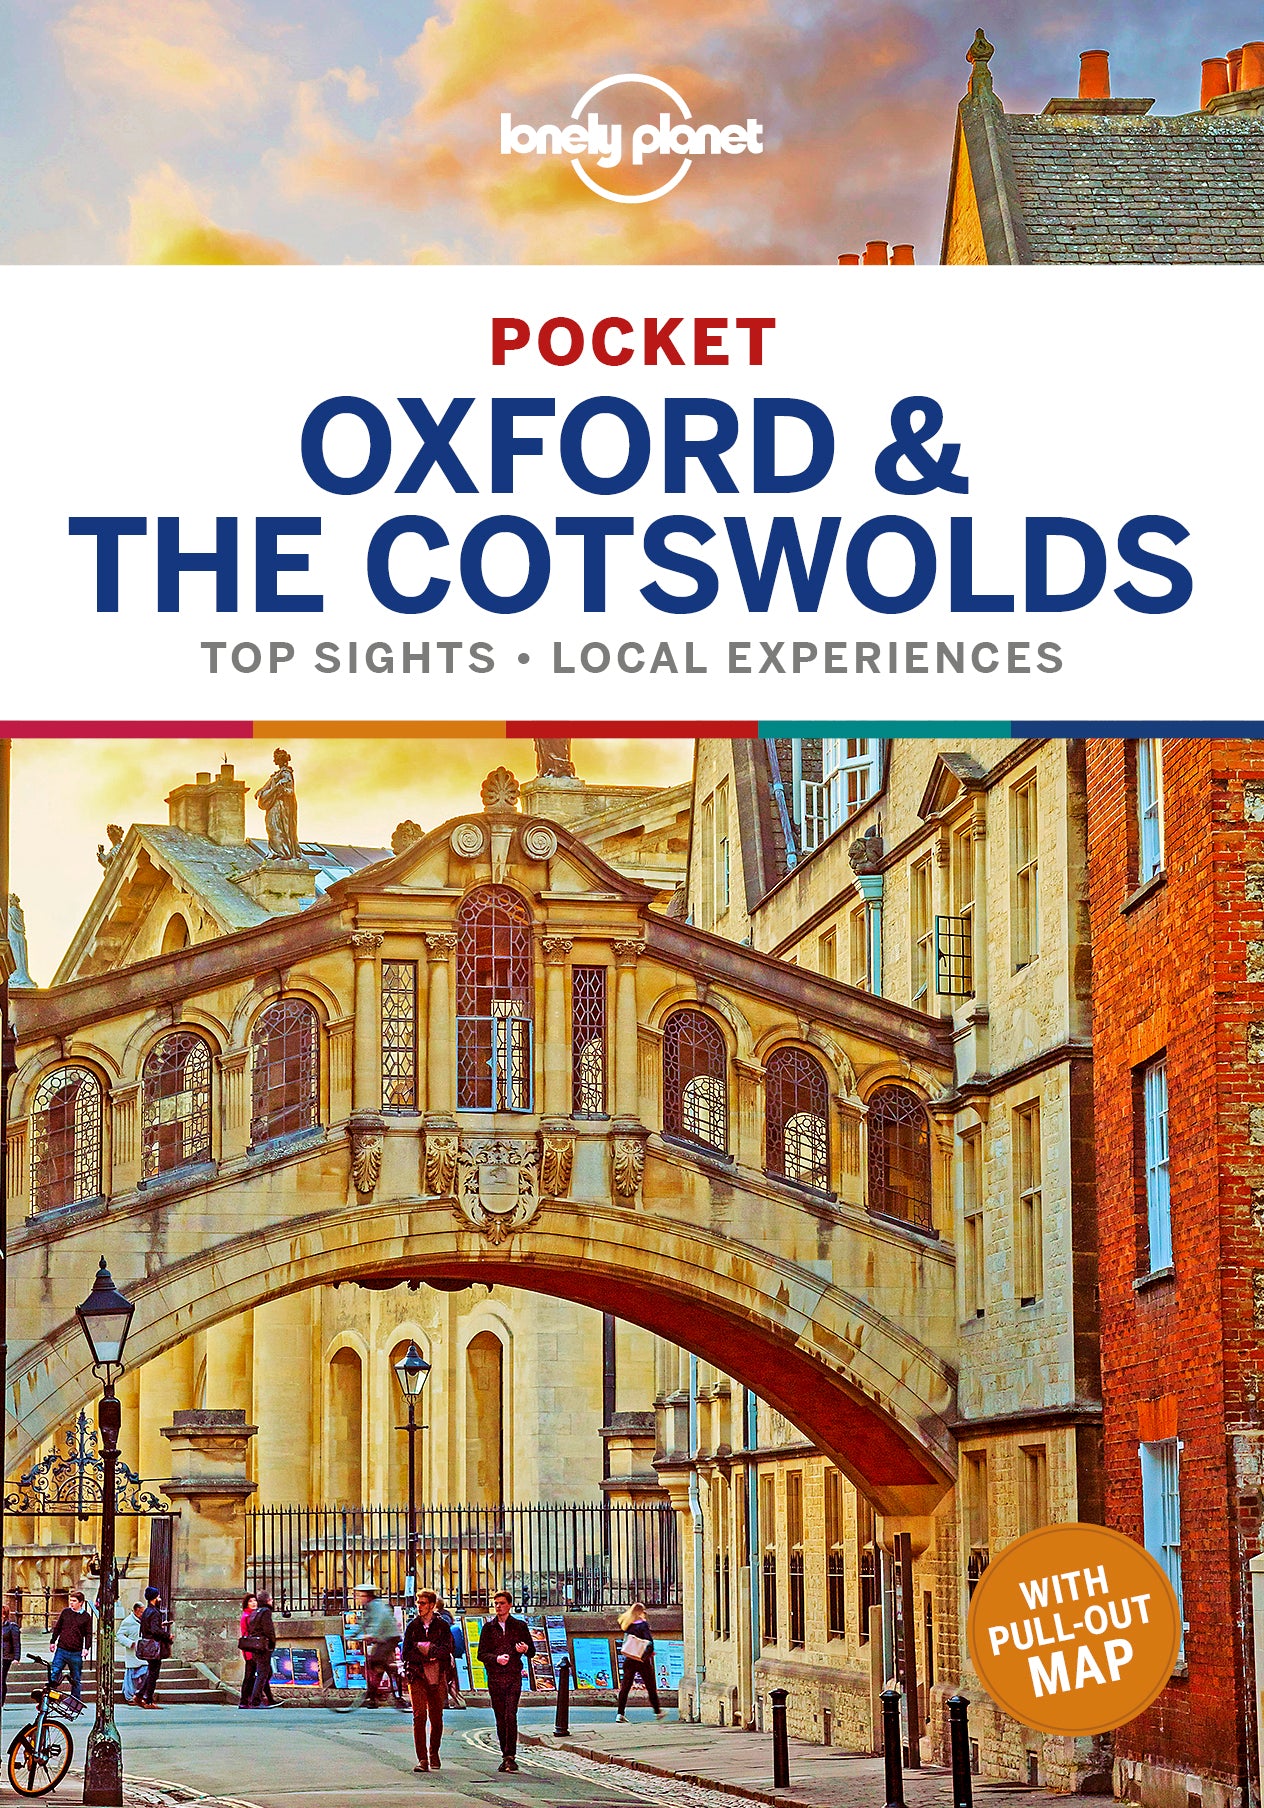 Pocket Oxford & the Cotswolds